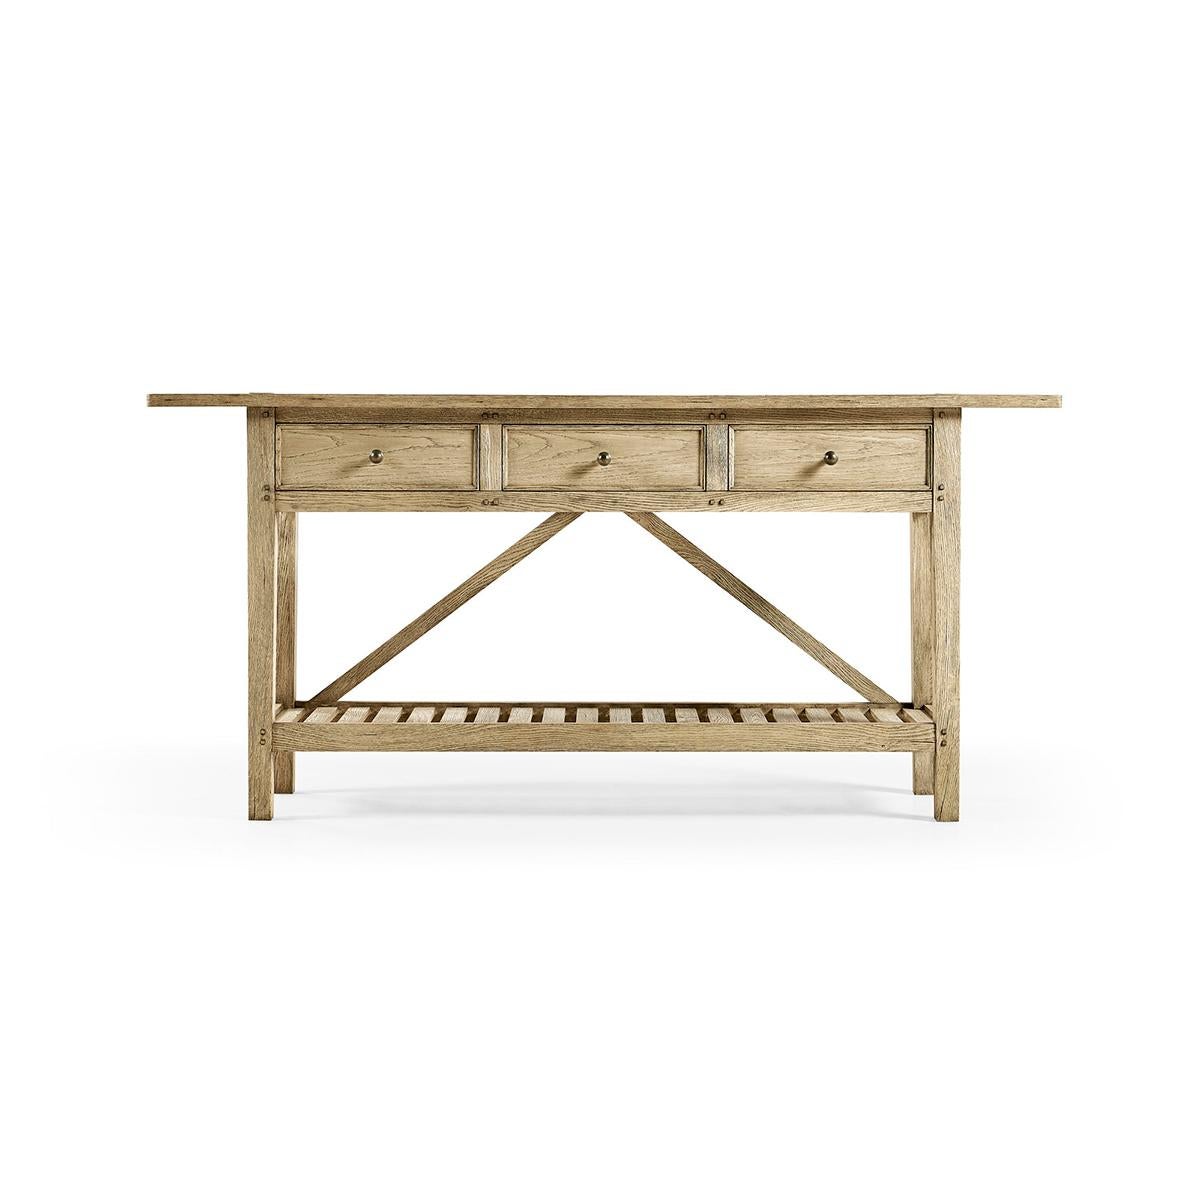 Hand-built from Solid Oak with Chestnut Veneers bleached and lightly wire-brushed to accentuate exquisite wood grain patterns. The console evokes the ethereal old-world charm of the French countryside and rustic living.

The plank top above three